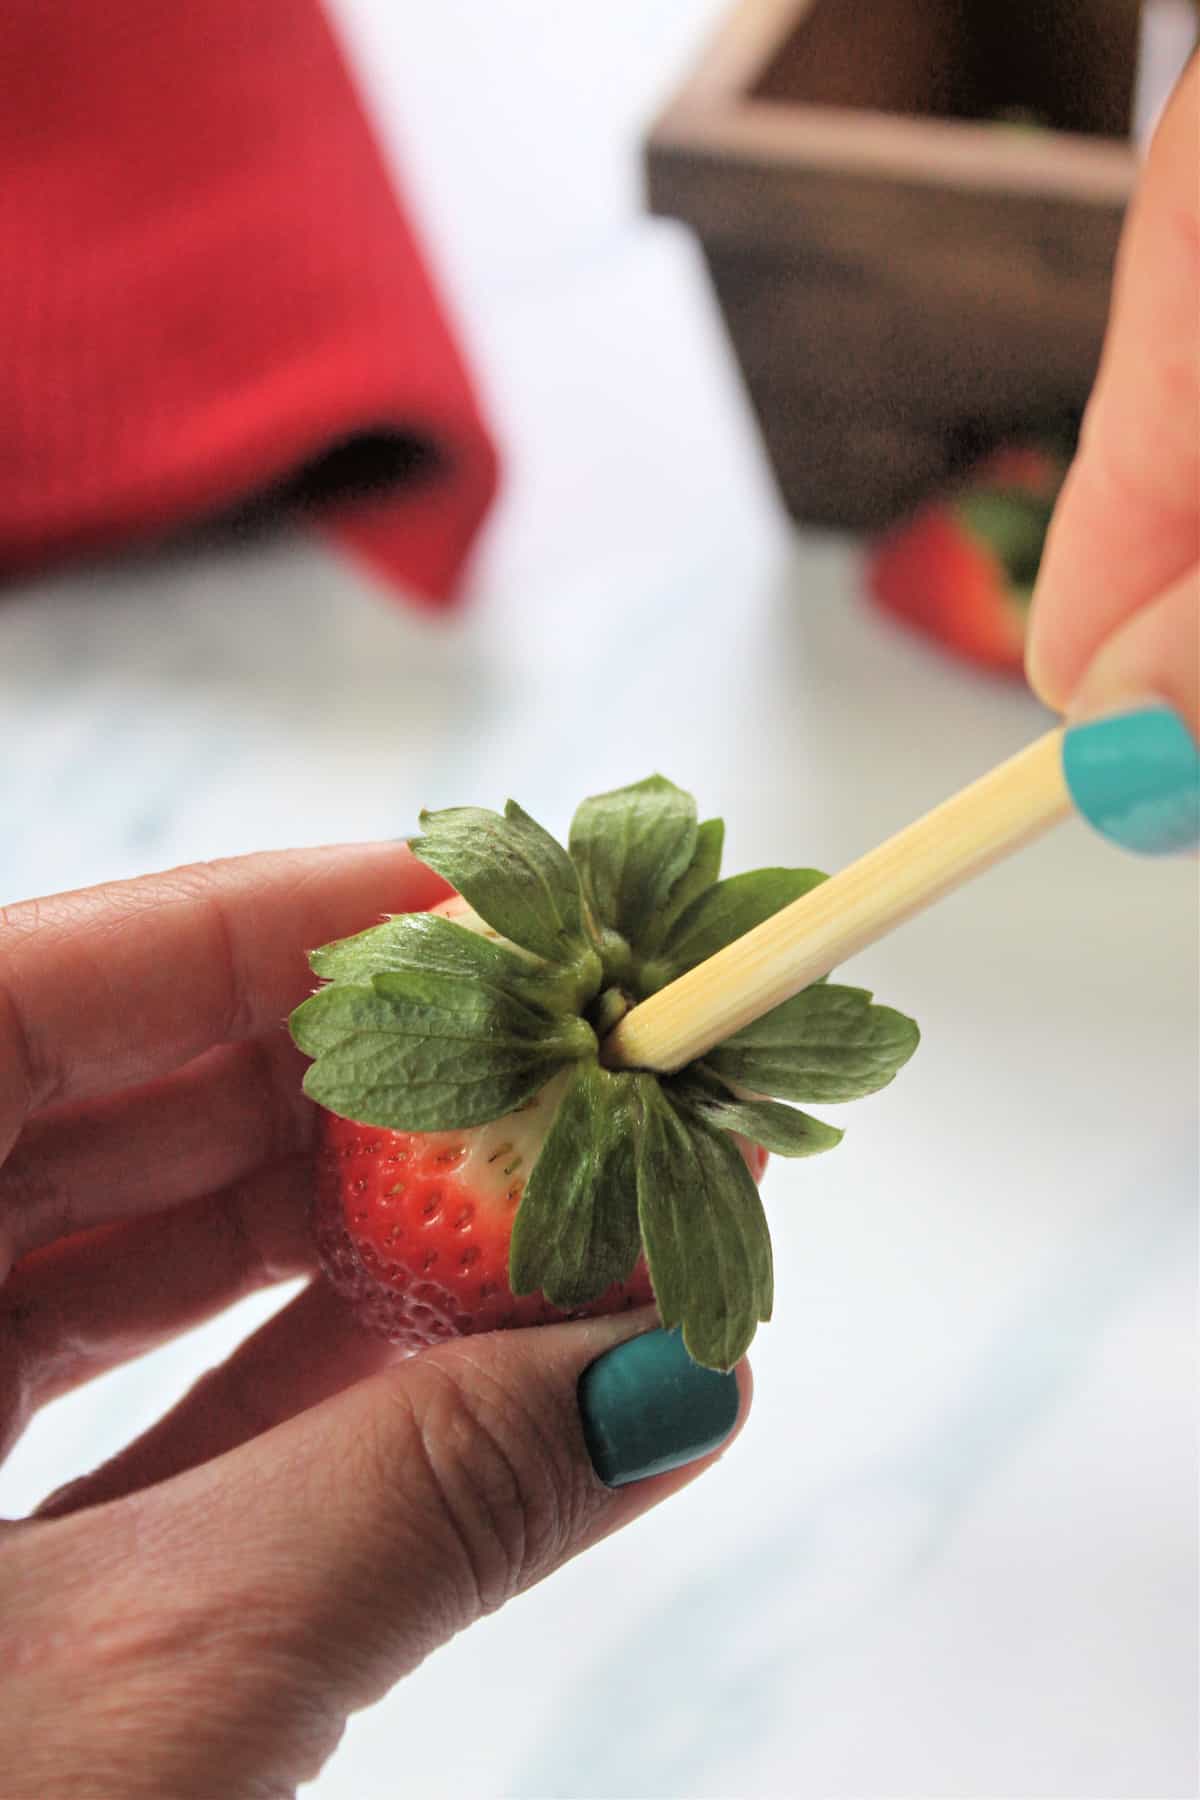 Process shot of inserting skewer into leafy end of strawberry for making strawberry roses.